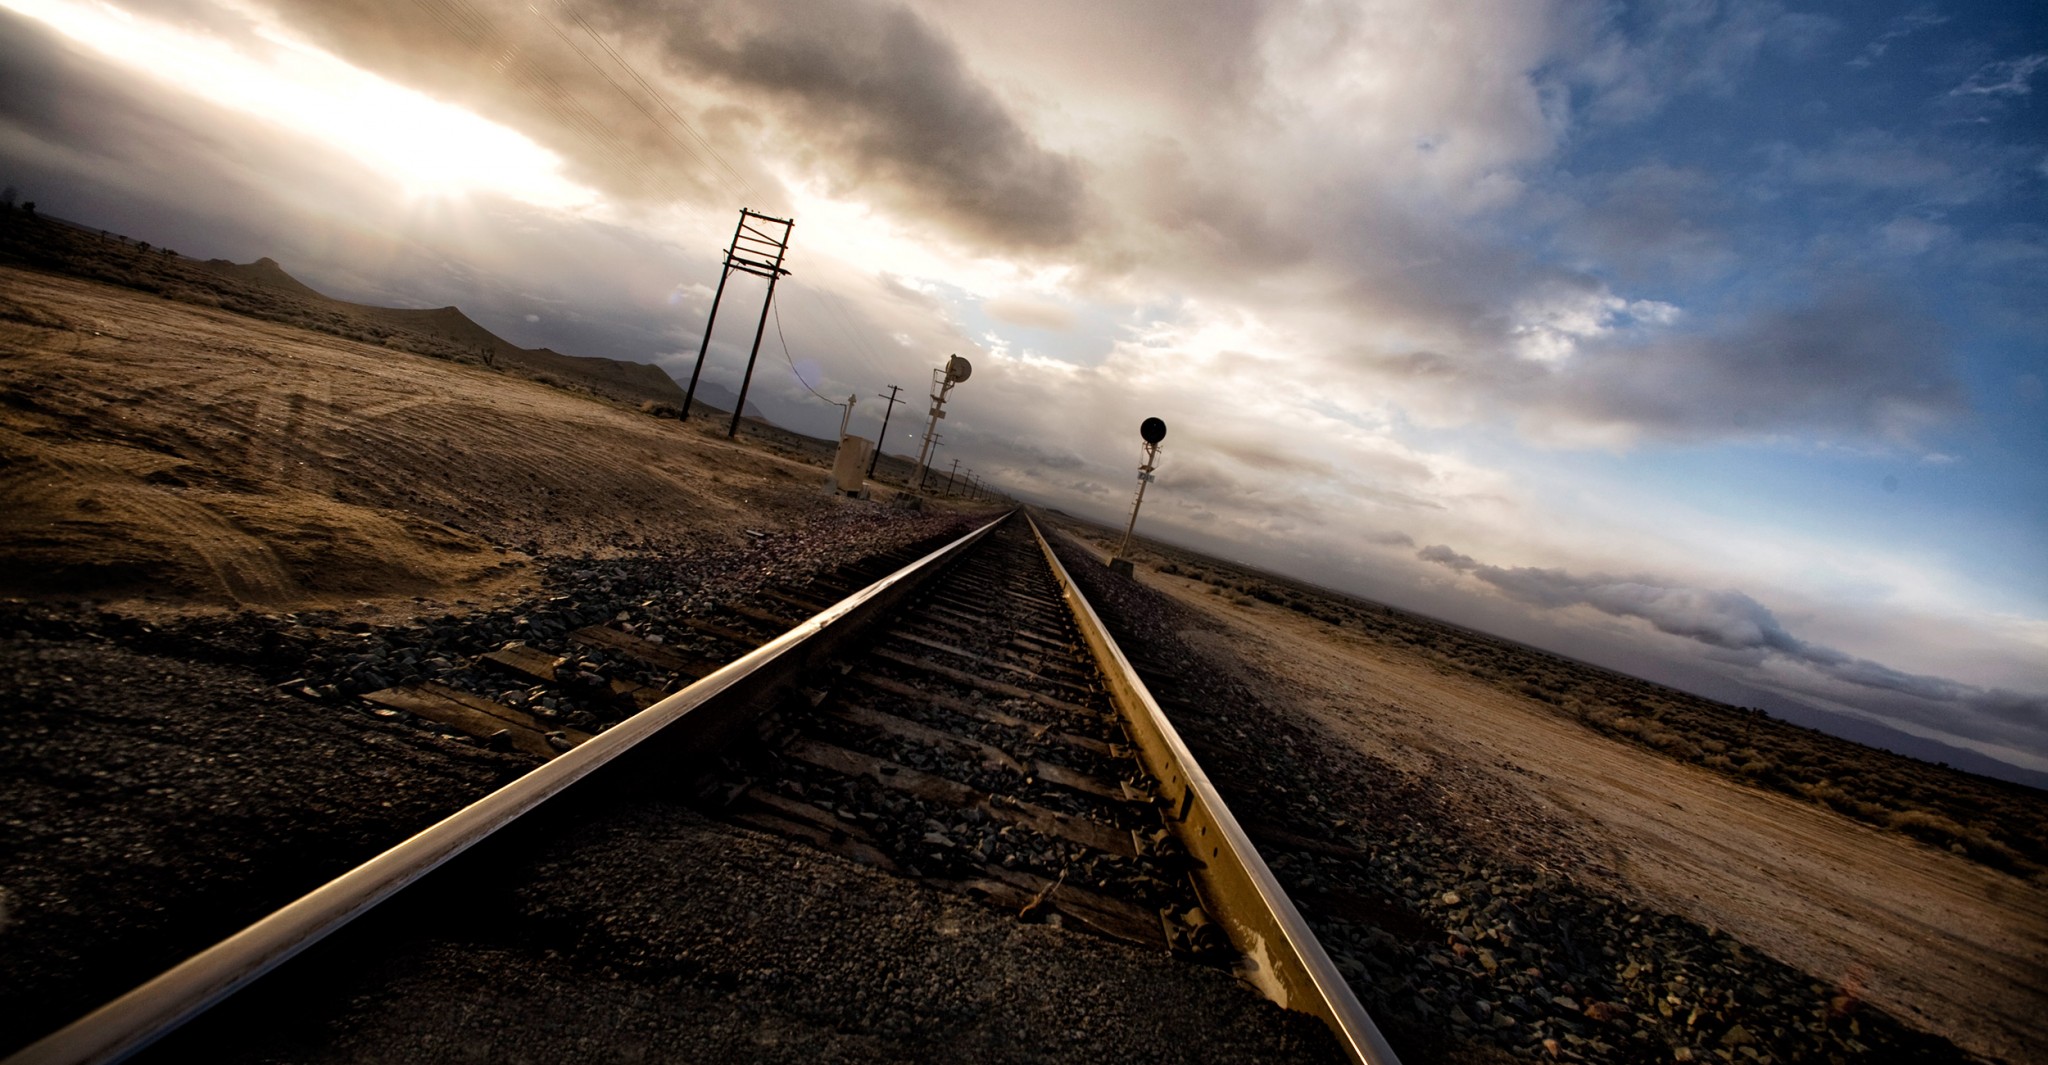 UltimateGraveyard railroad tracks in Mojave Desert. Available for filming, photography productions.